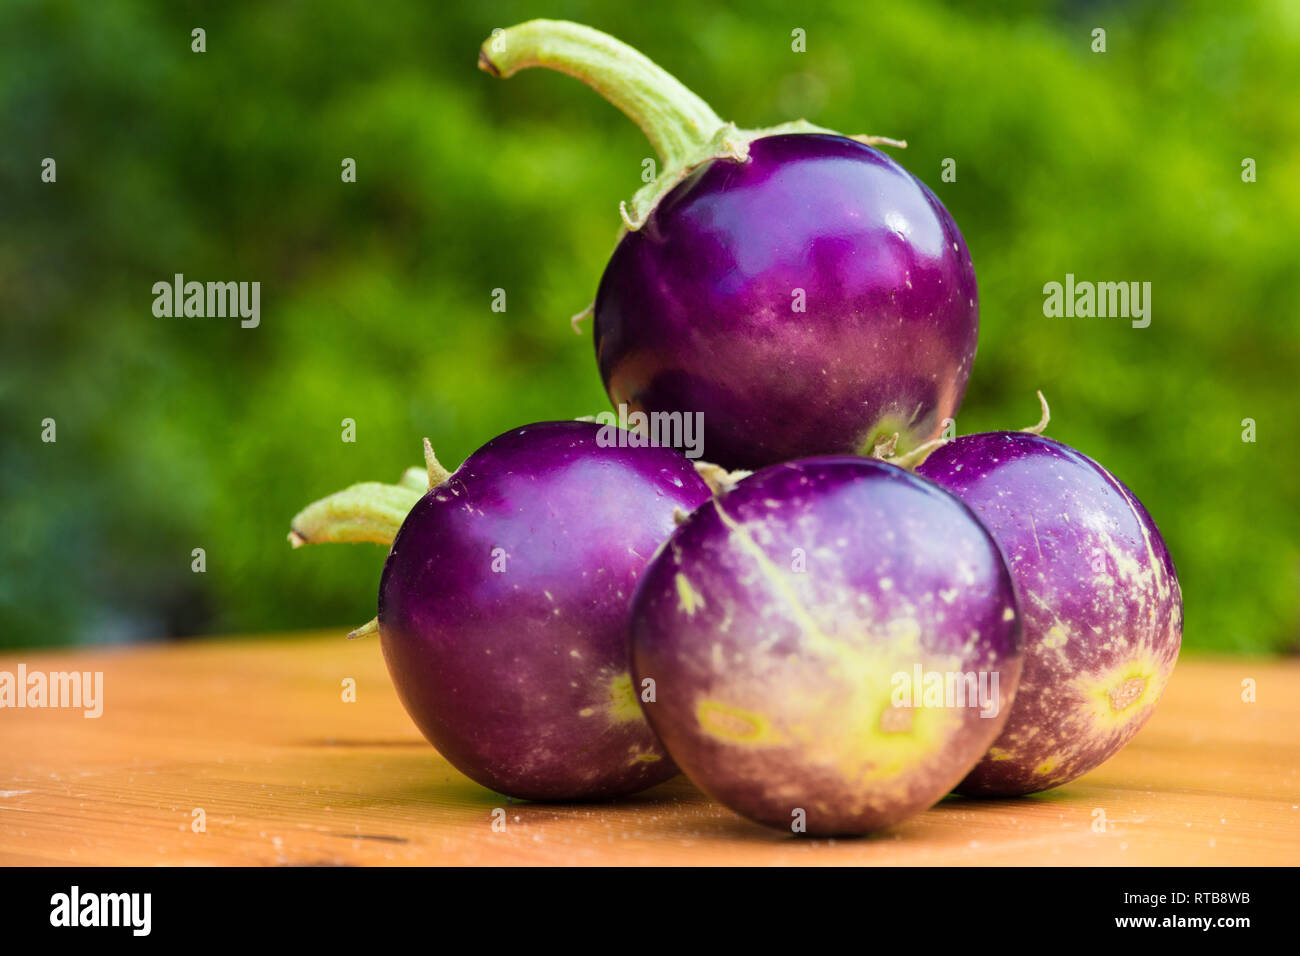 Nice close-up view of a bunch of small round purple Thai aubergines (Solanum melongena) with green stems, stacked up on a wooden table. The fruits can... Stock Photo